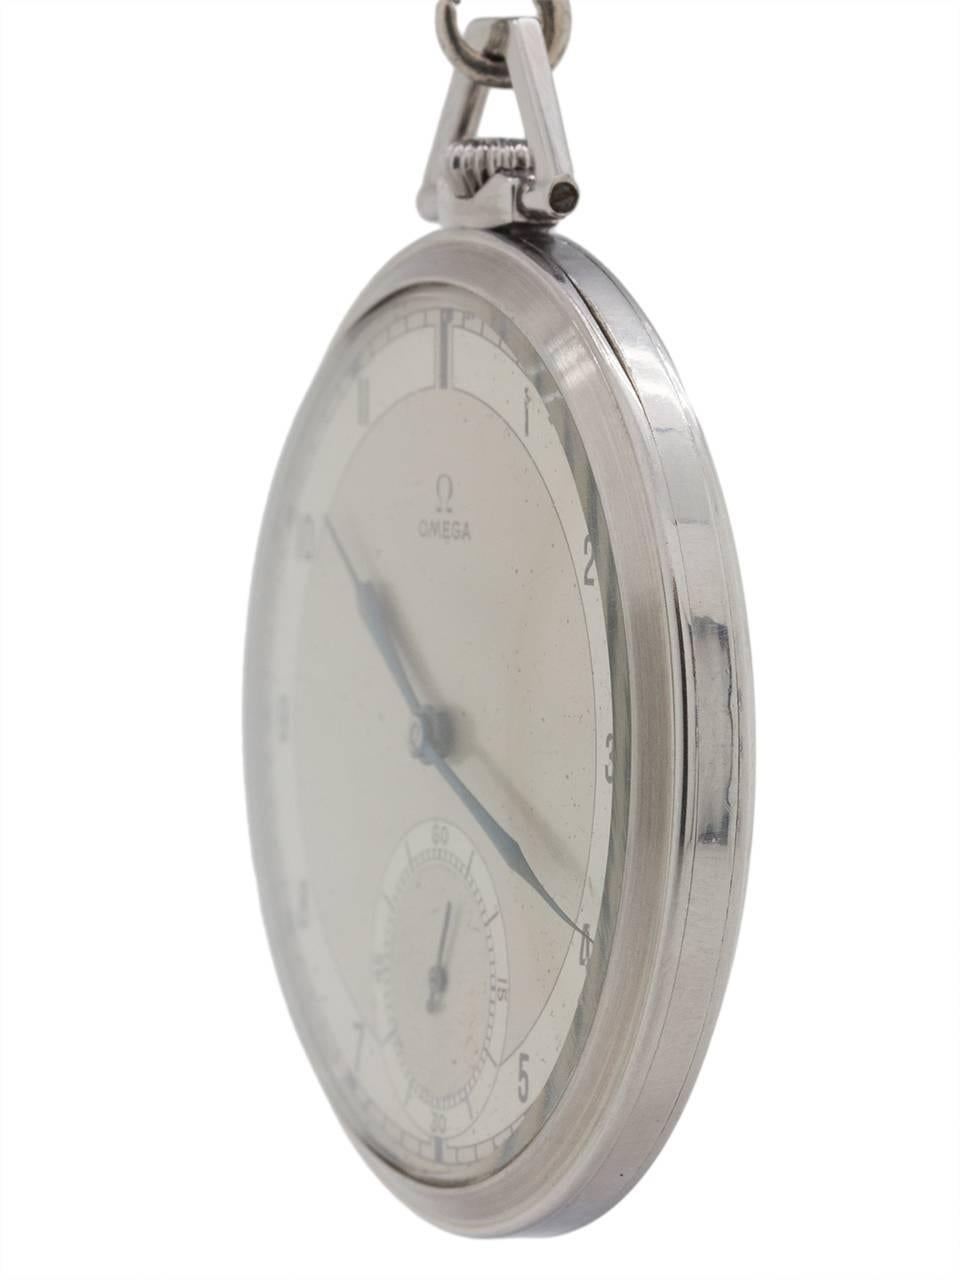 Art Deco Omega stainless steel 12-S Industrial Design Manual Wind Pocket watch, c1935